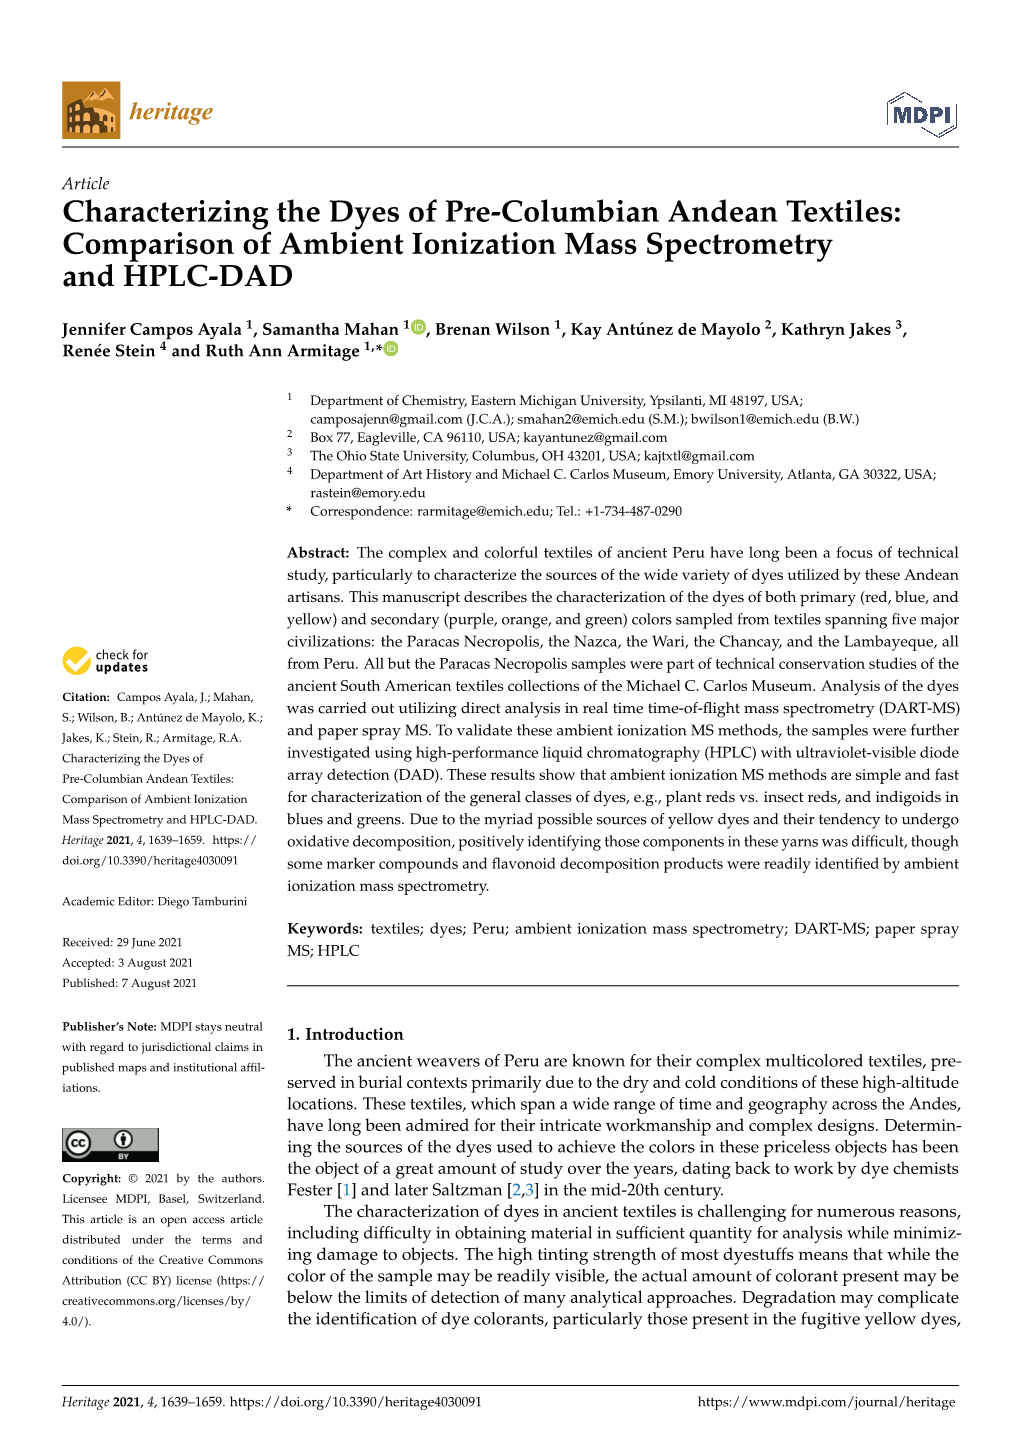 Comparison of Ambient Ionization Mass Spectrometry and HPLC-DAD